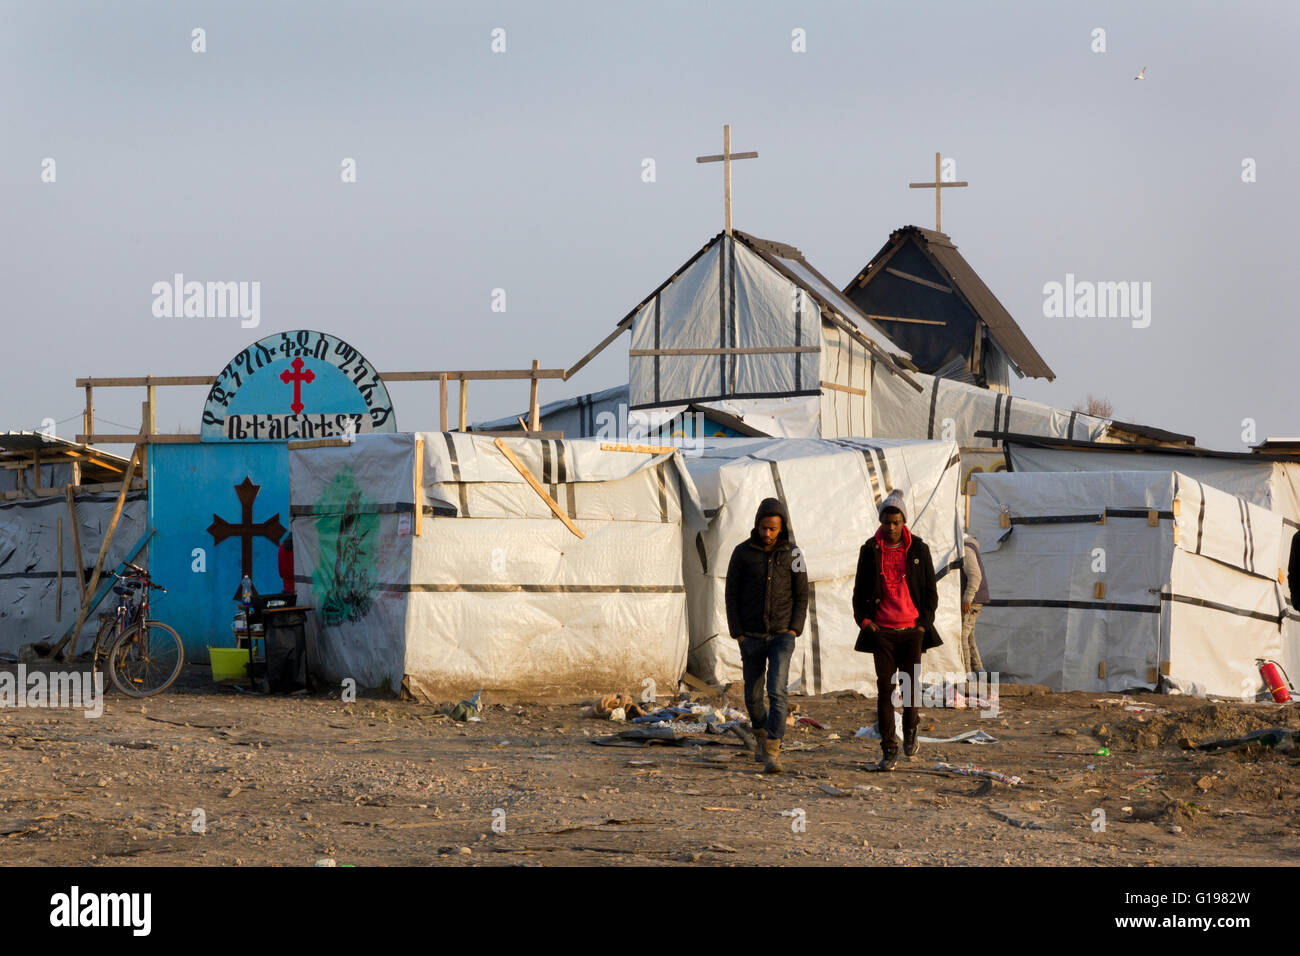 Ethiopian Church, The Jungle refugee & migrant camp, Calais, Northern France Stock Photo